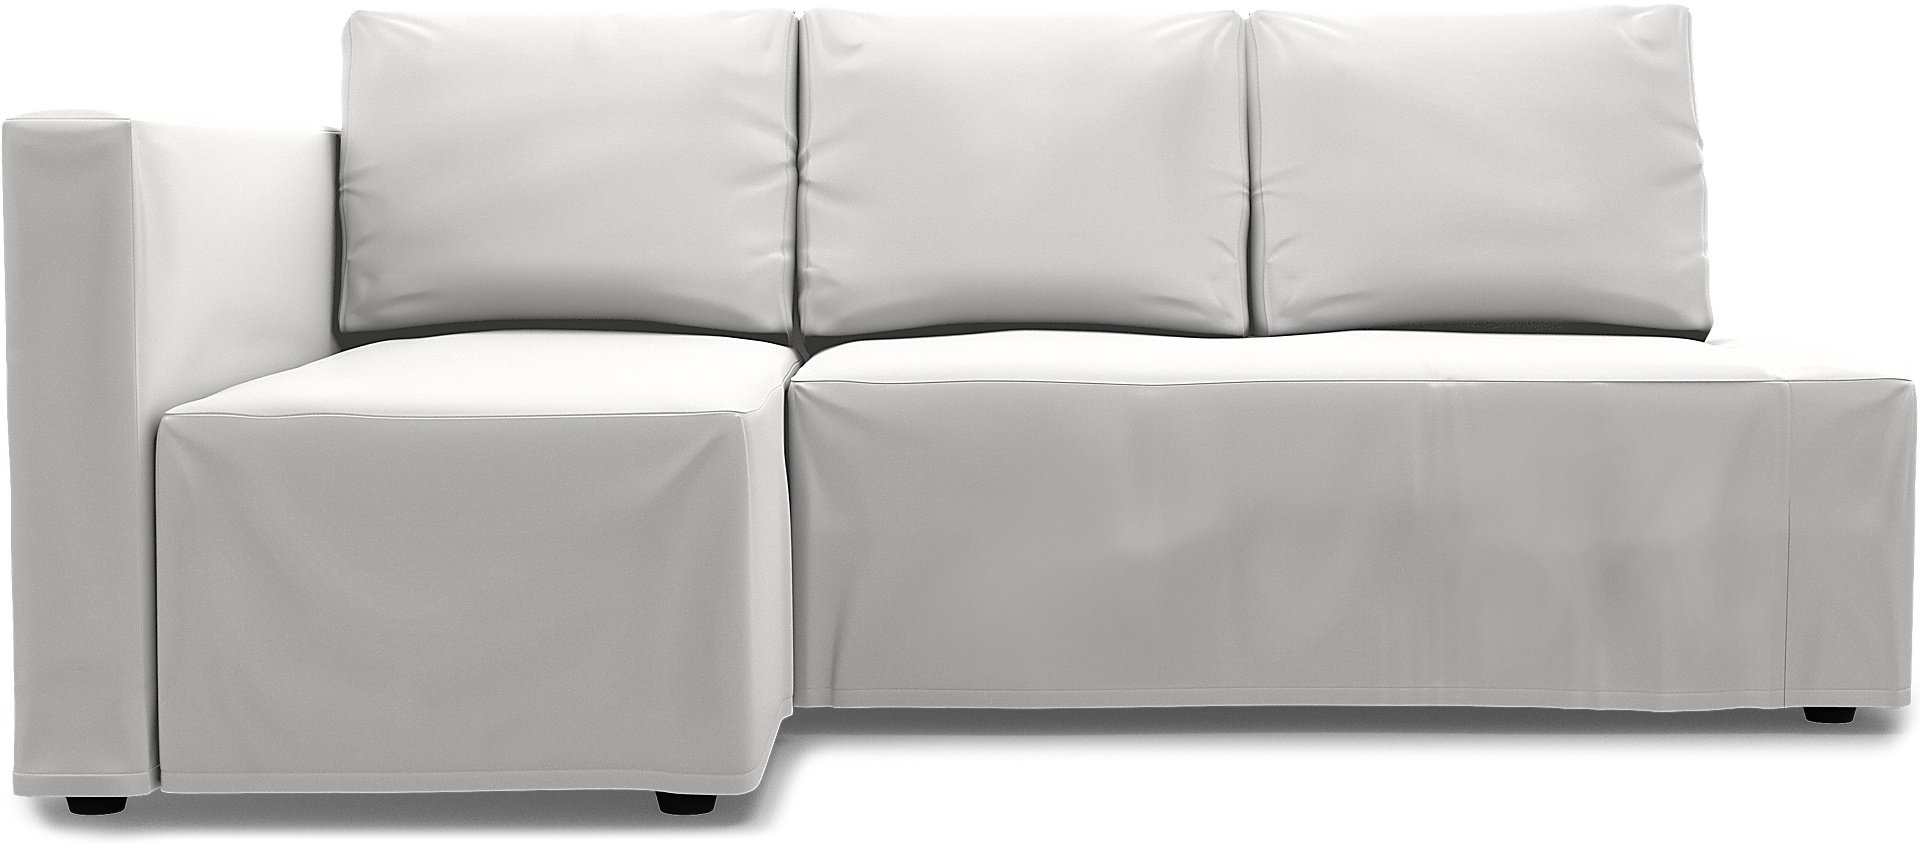 IKEA - Friheten Sofa Bed with Left Chaise Cover, Absolute White, Cotton - Bemz